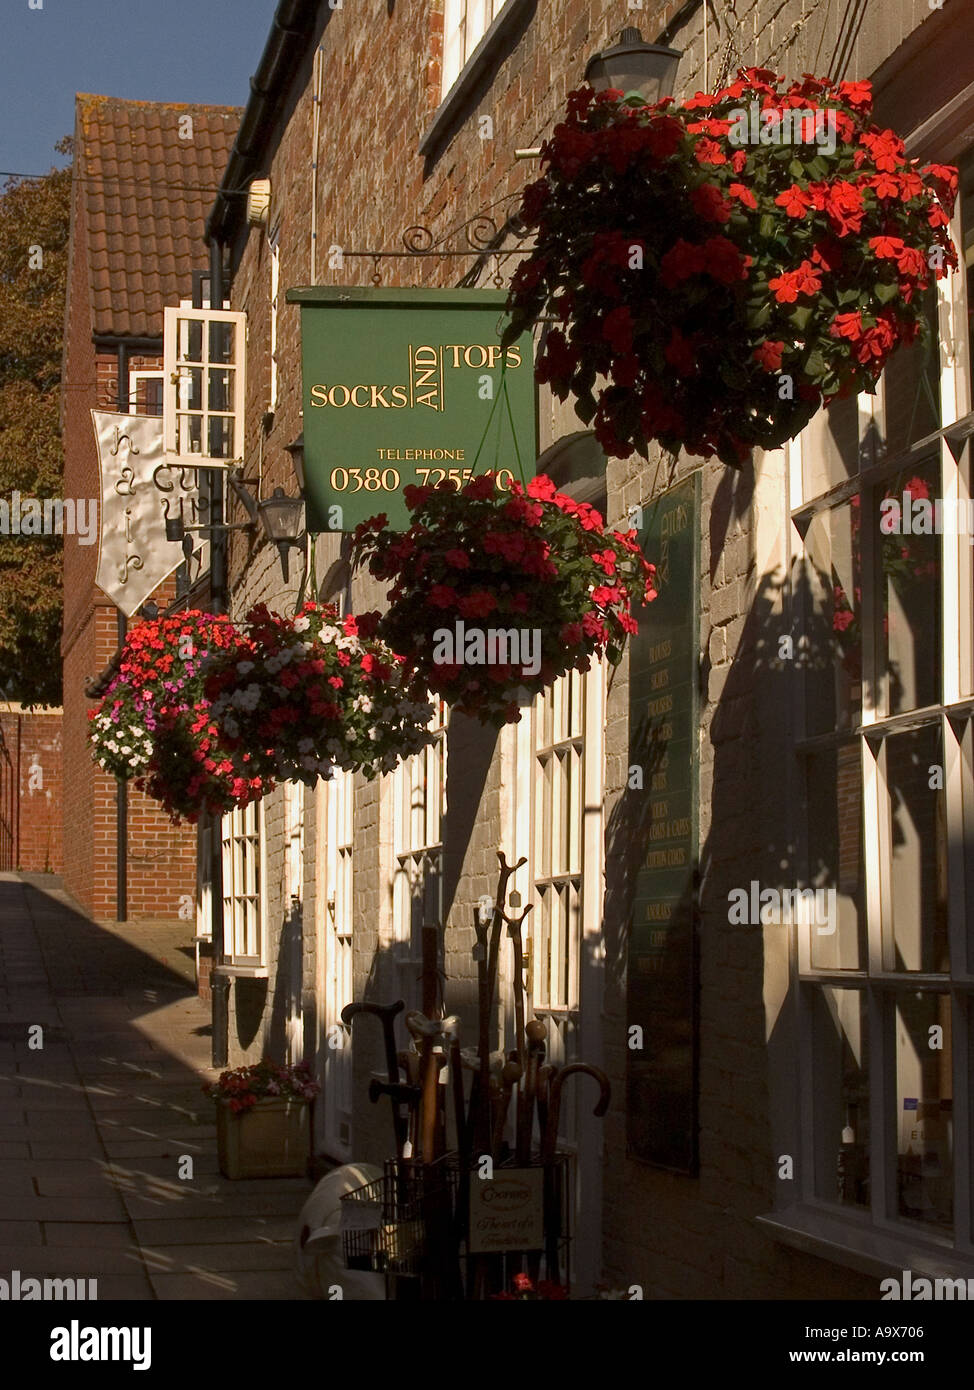 Hanging baskets filled with red flowers above shopfronts, white painshopfronts, alleyway The Ginney  off Market Place, Devizes, Wiltshire, England, UK Stock Photo